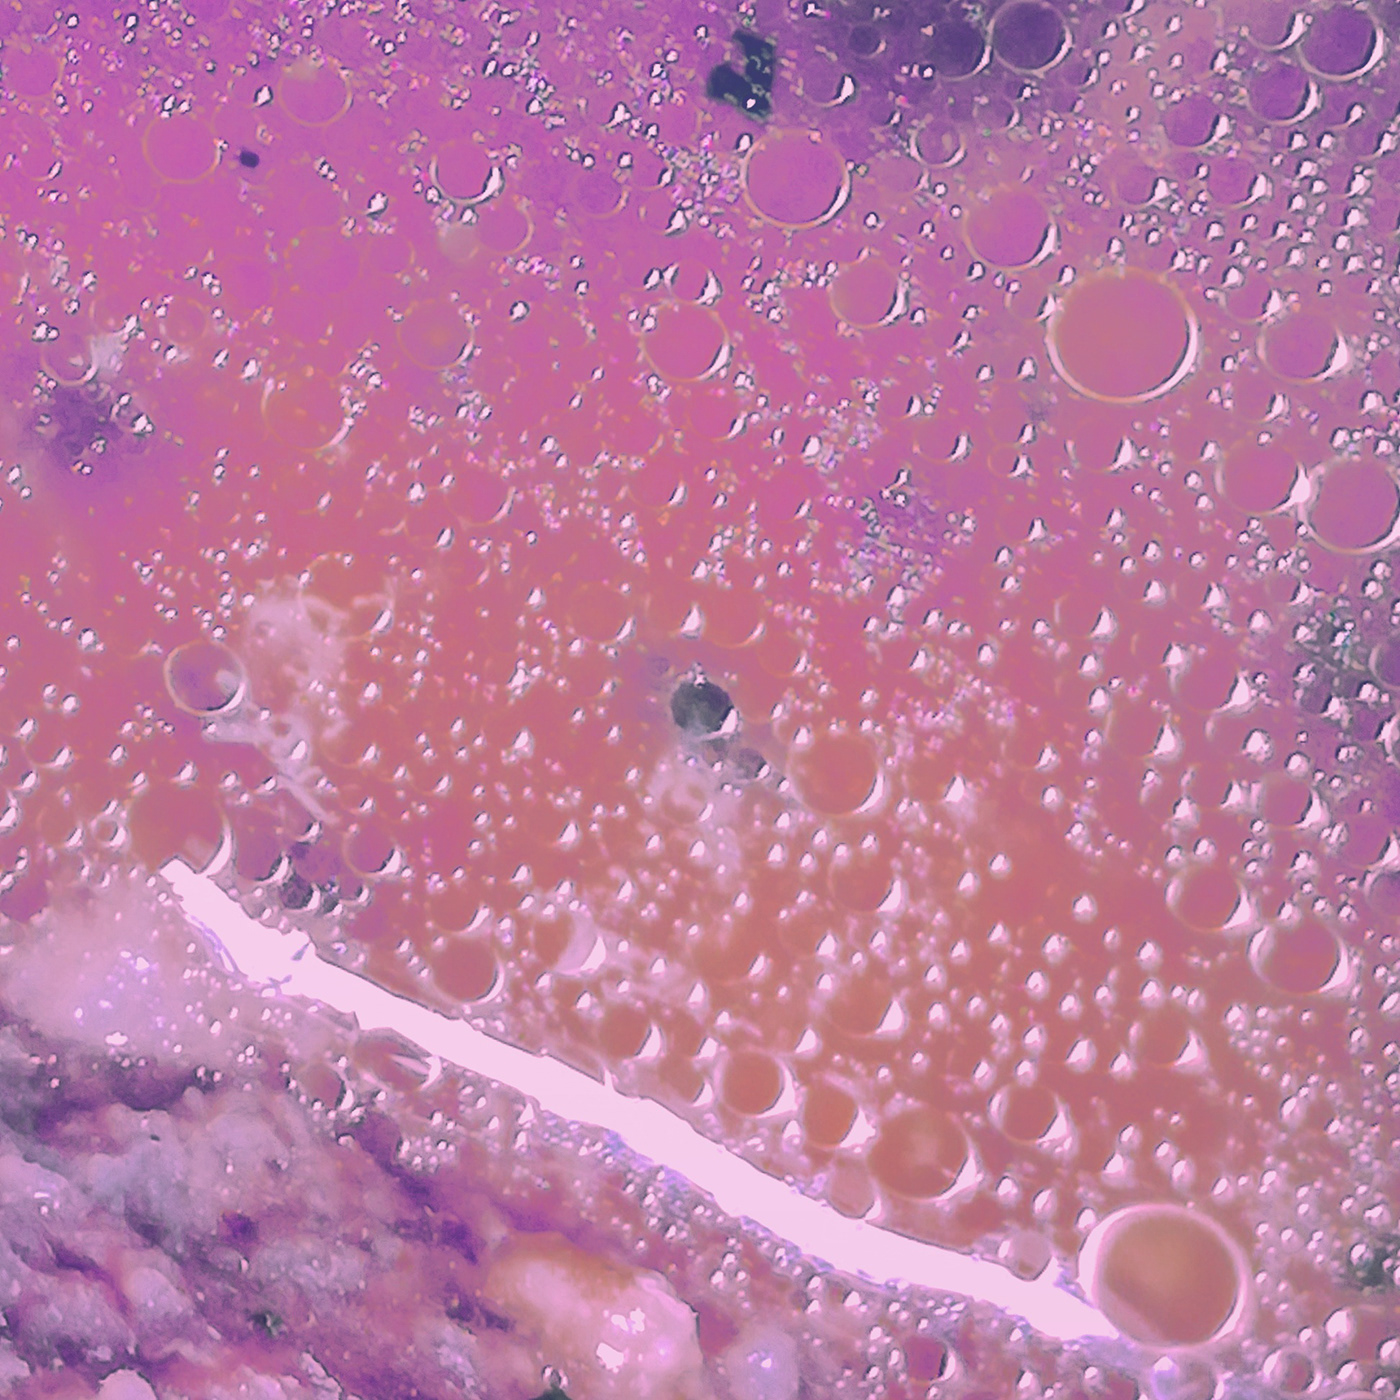 Altered pink picture of some meat juice bubbling